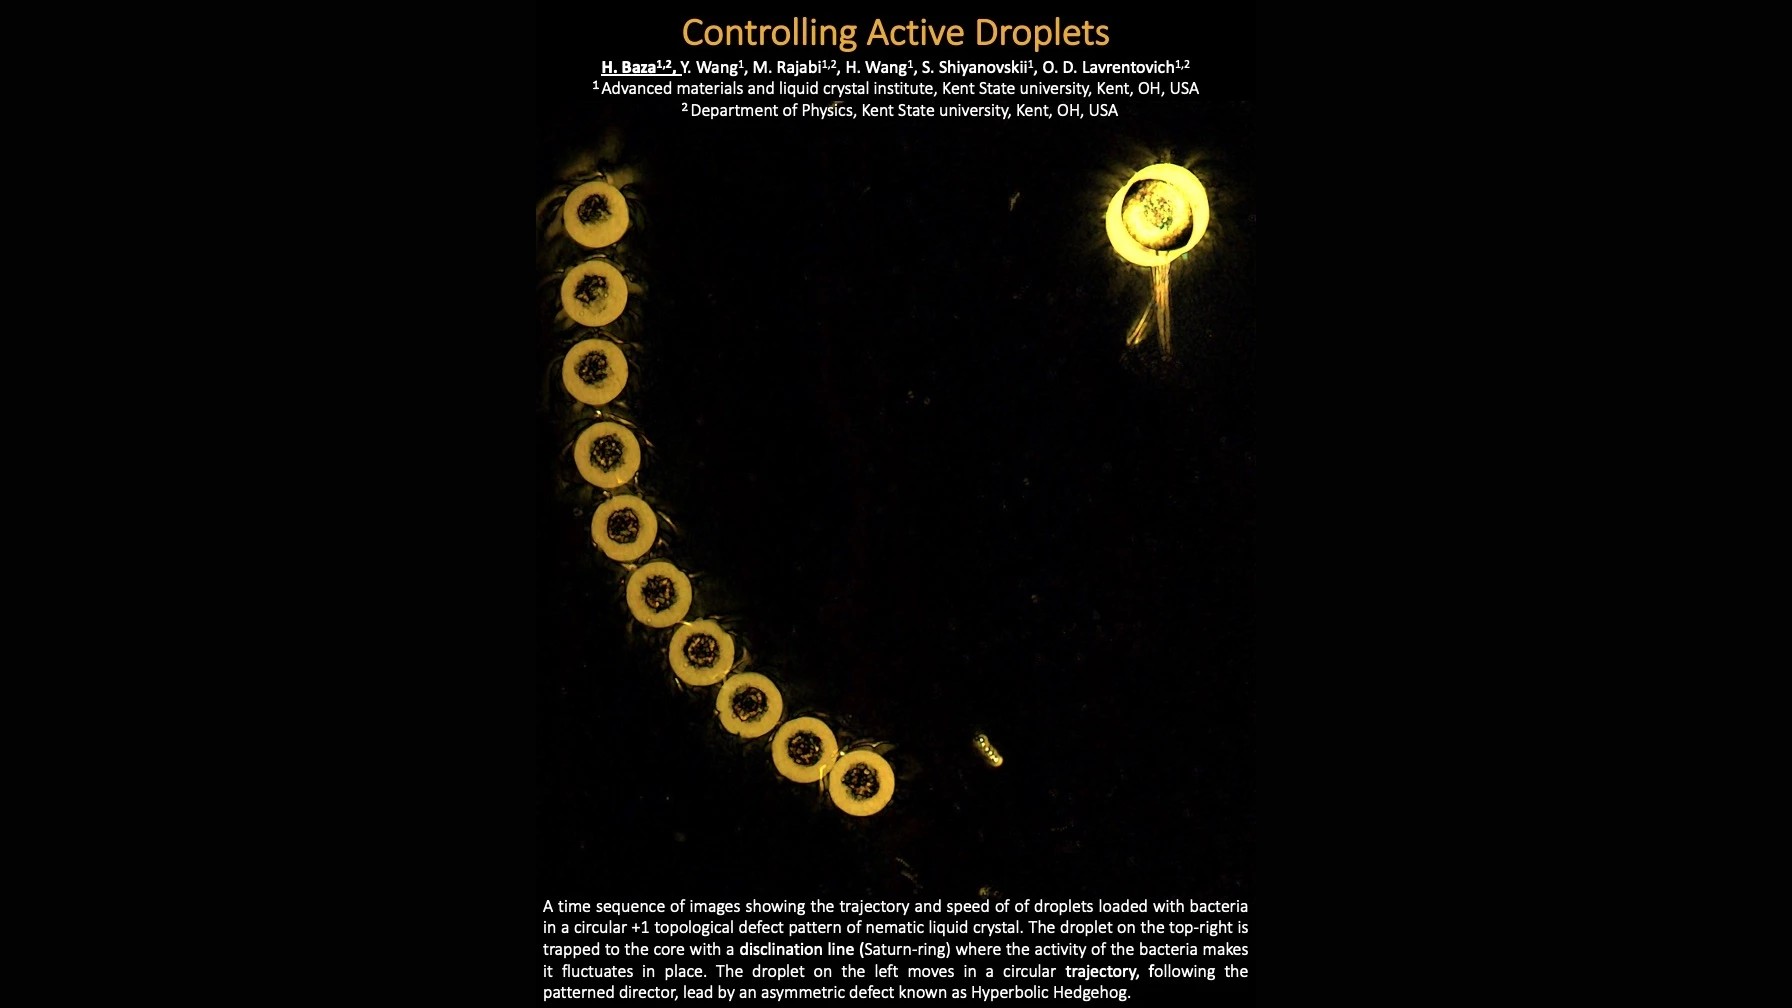 Controlling active droplets 